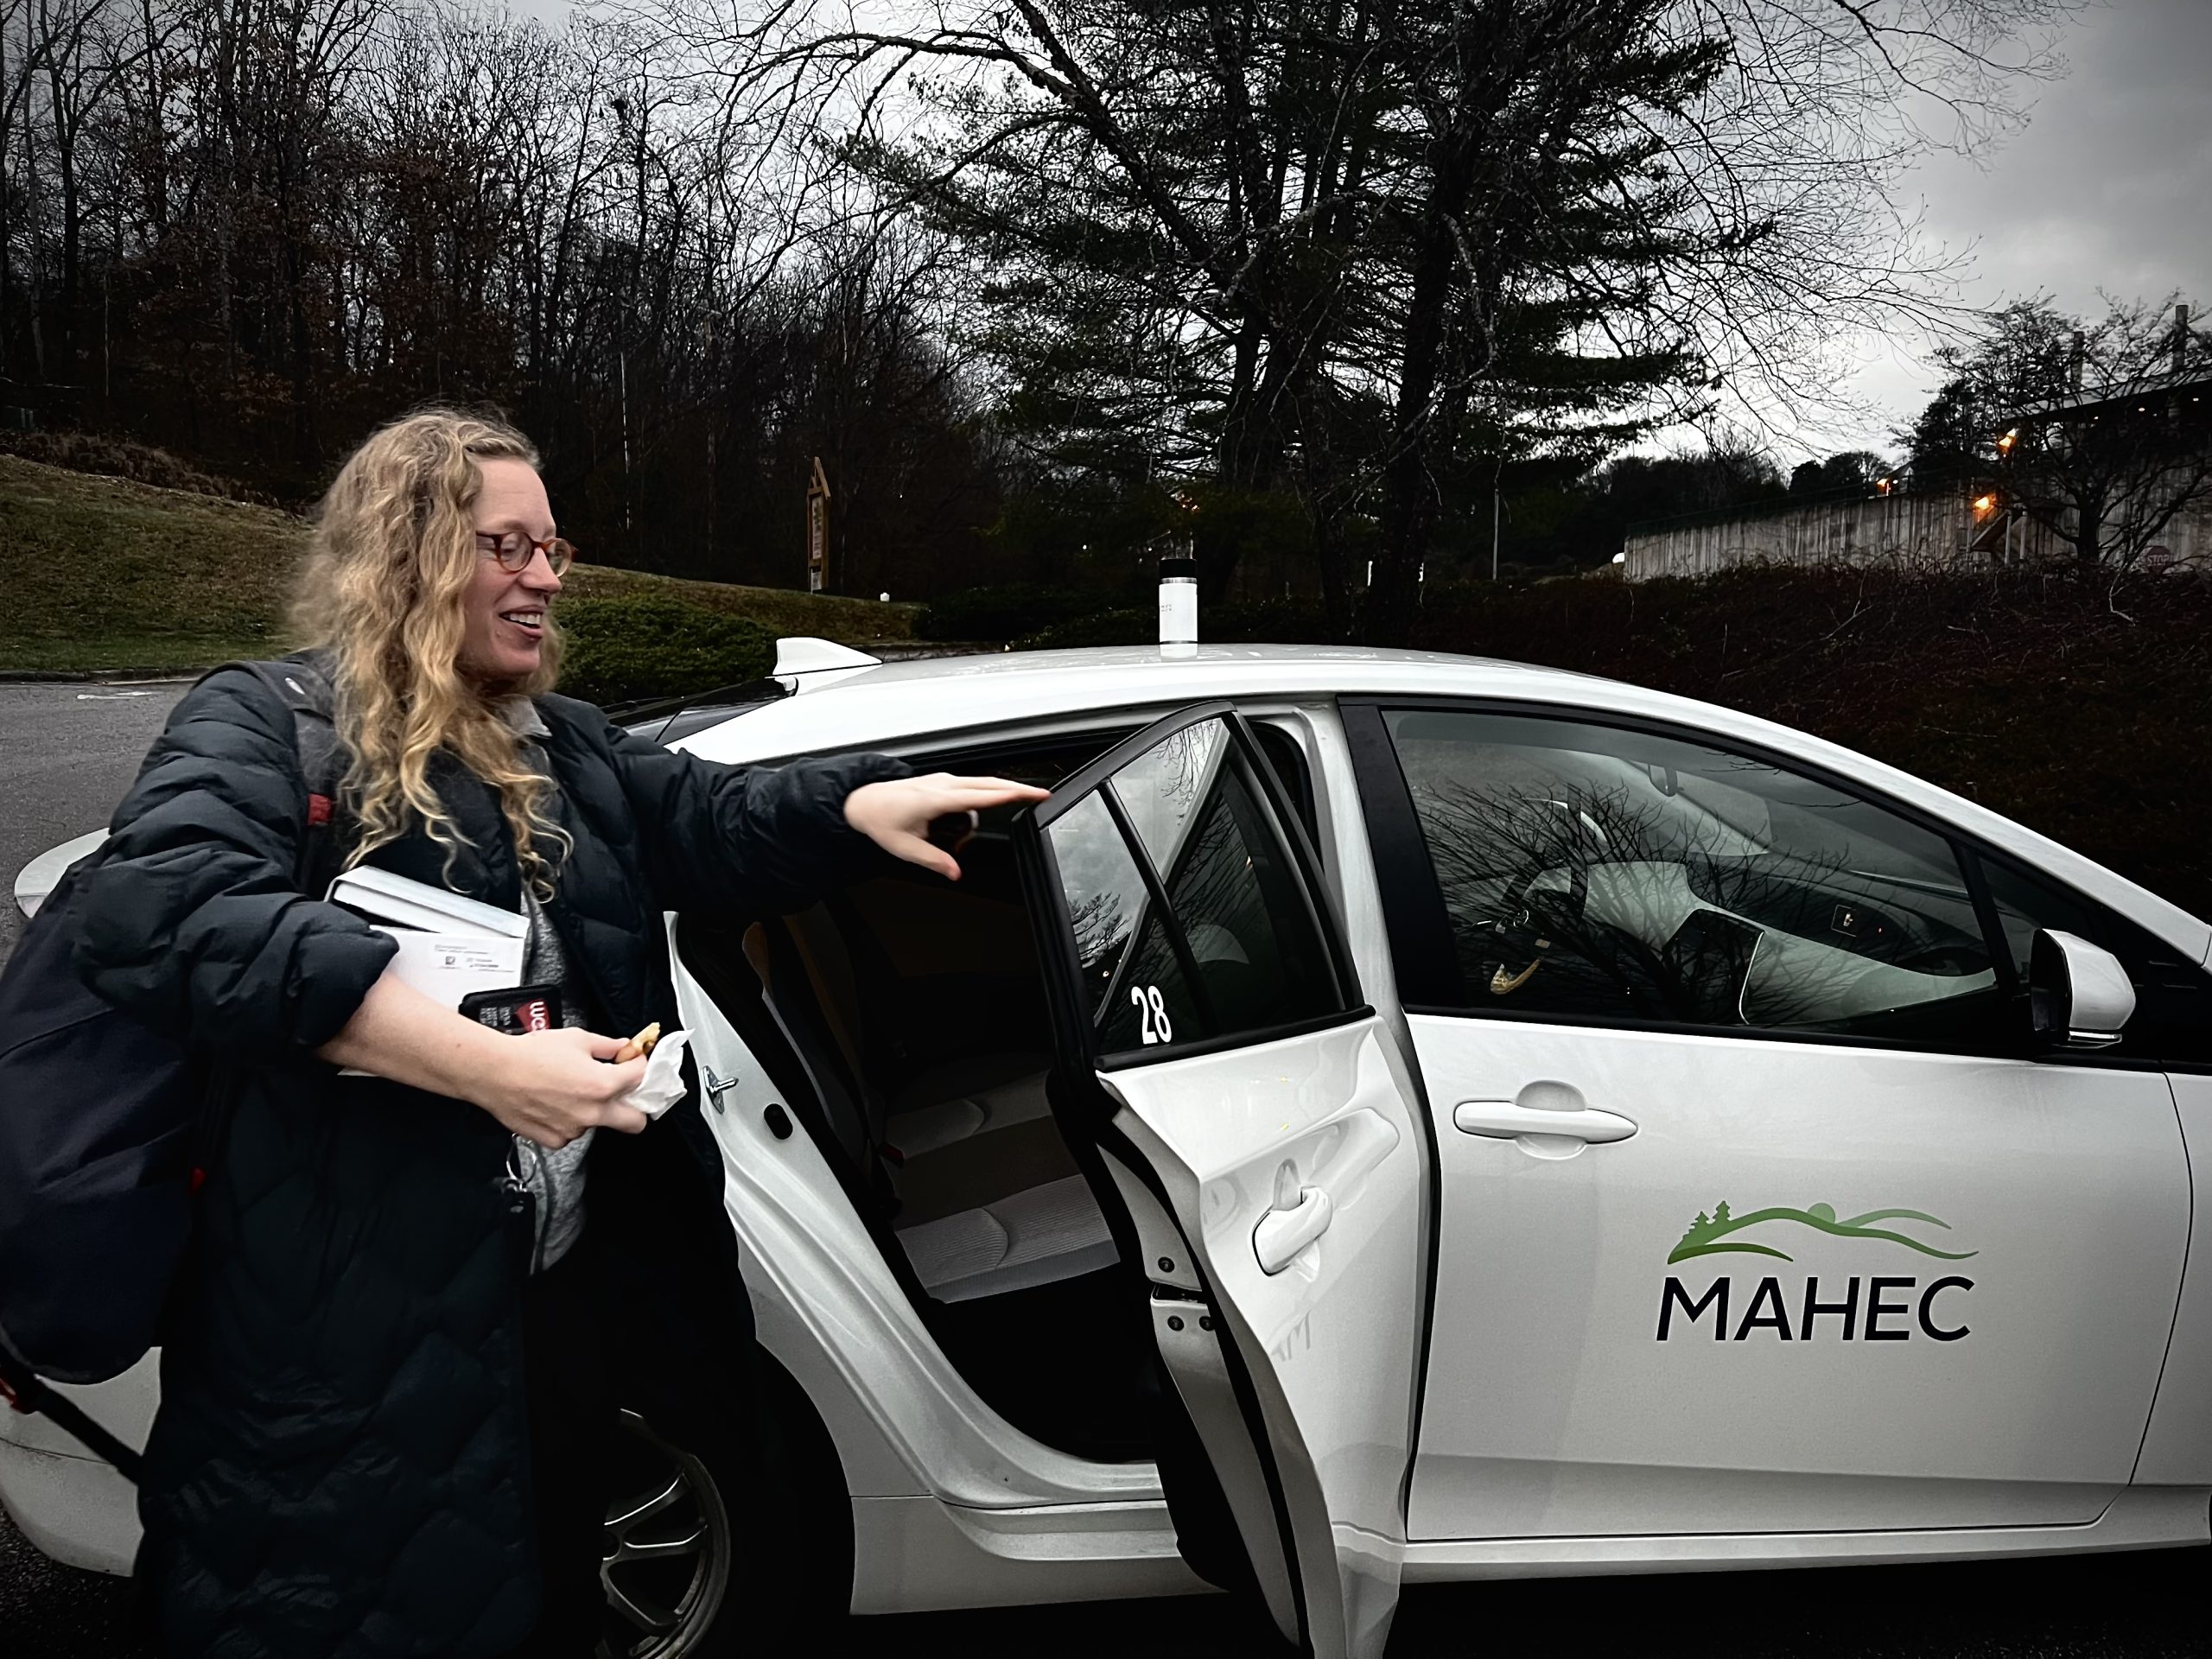 a woman with blonde curly hair and glasses closes the door to a white car with MAHEC on the side. MAHEC tries to fill the labor and delivery gap in the county